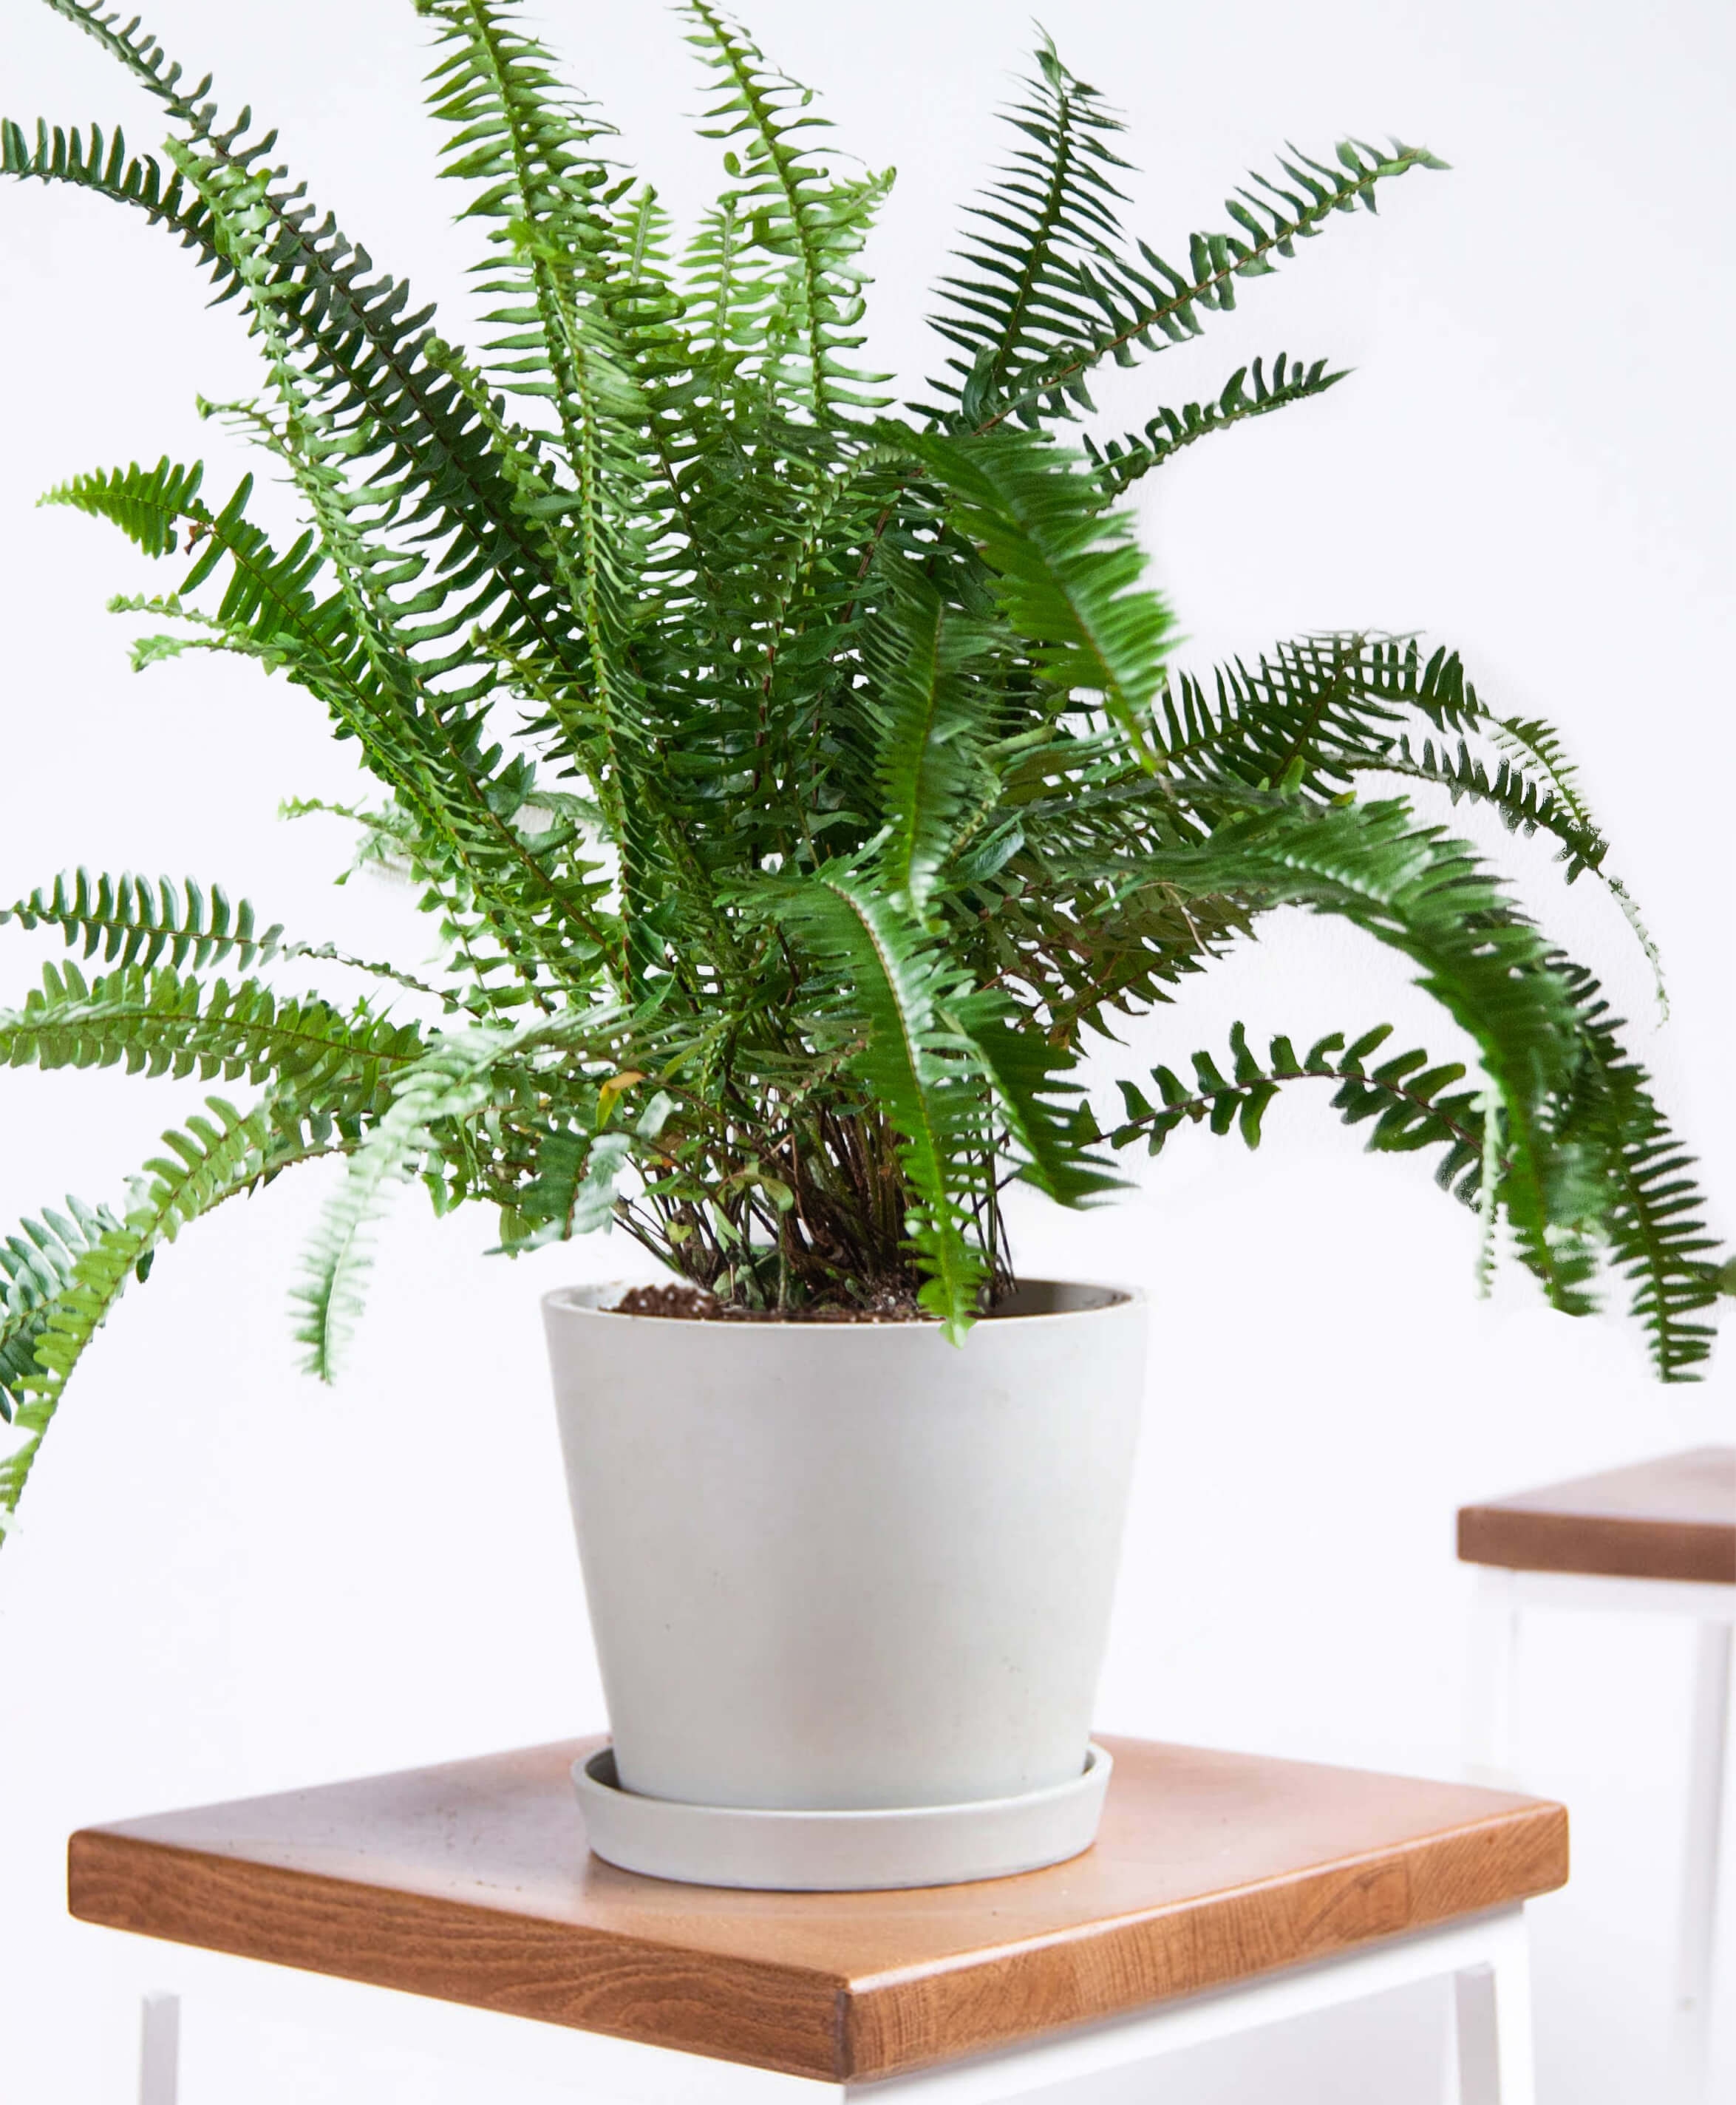 Kimberly queen fern - Stone - Image 0